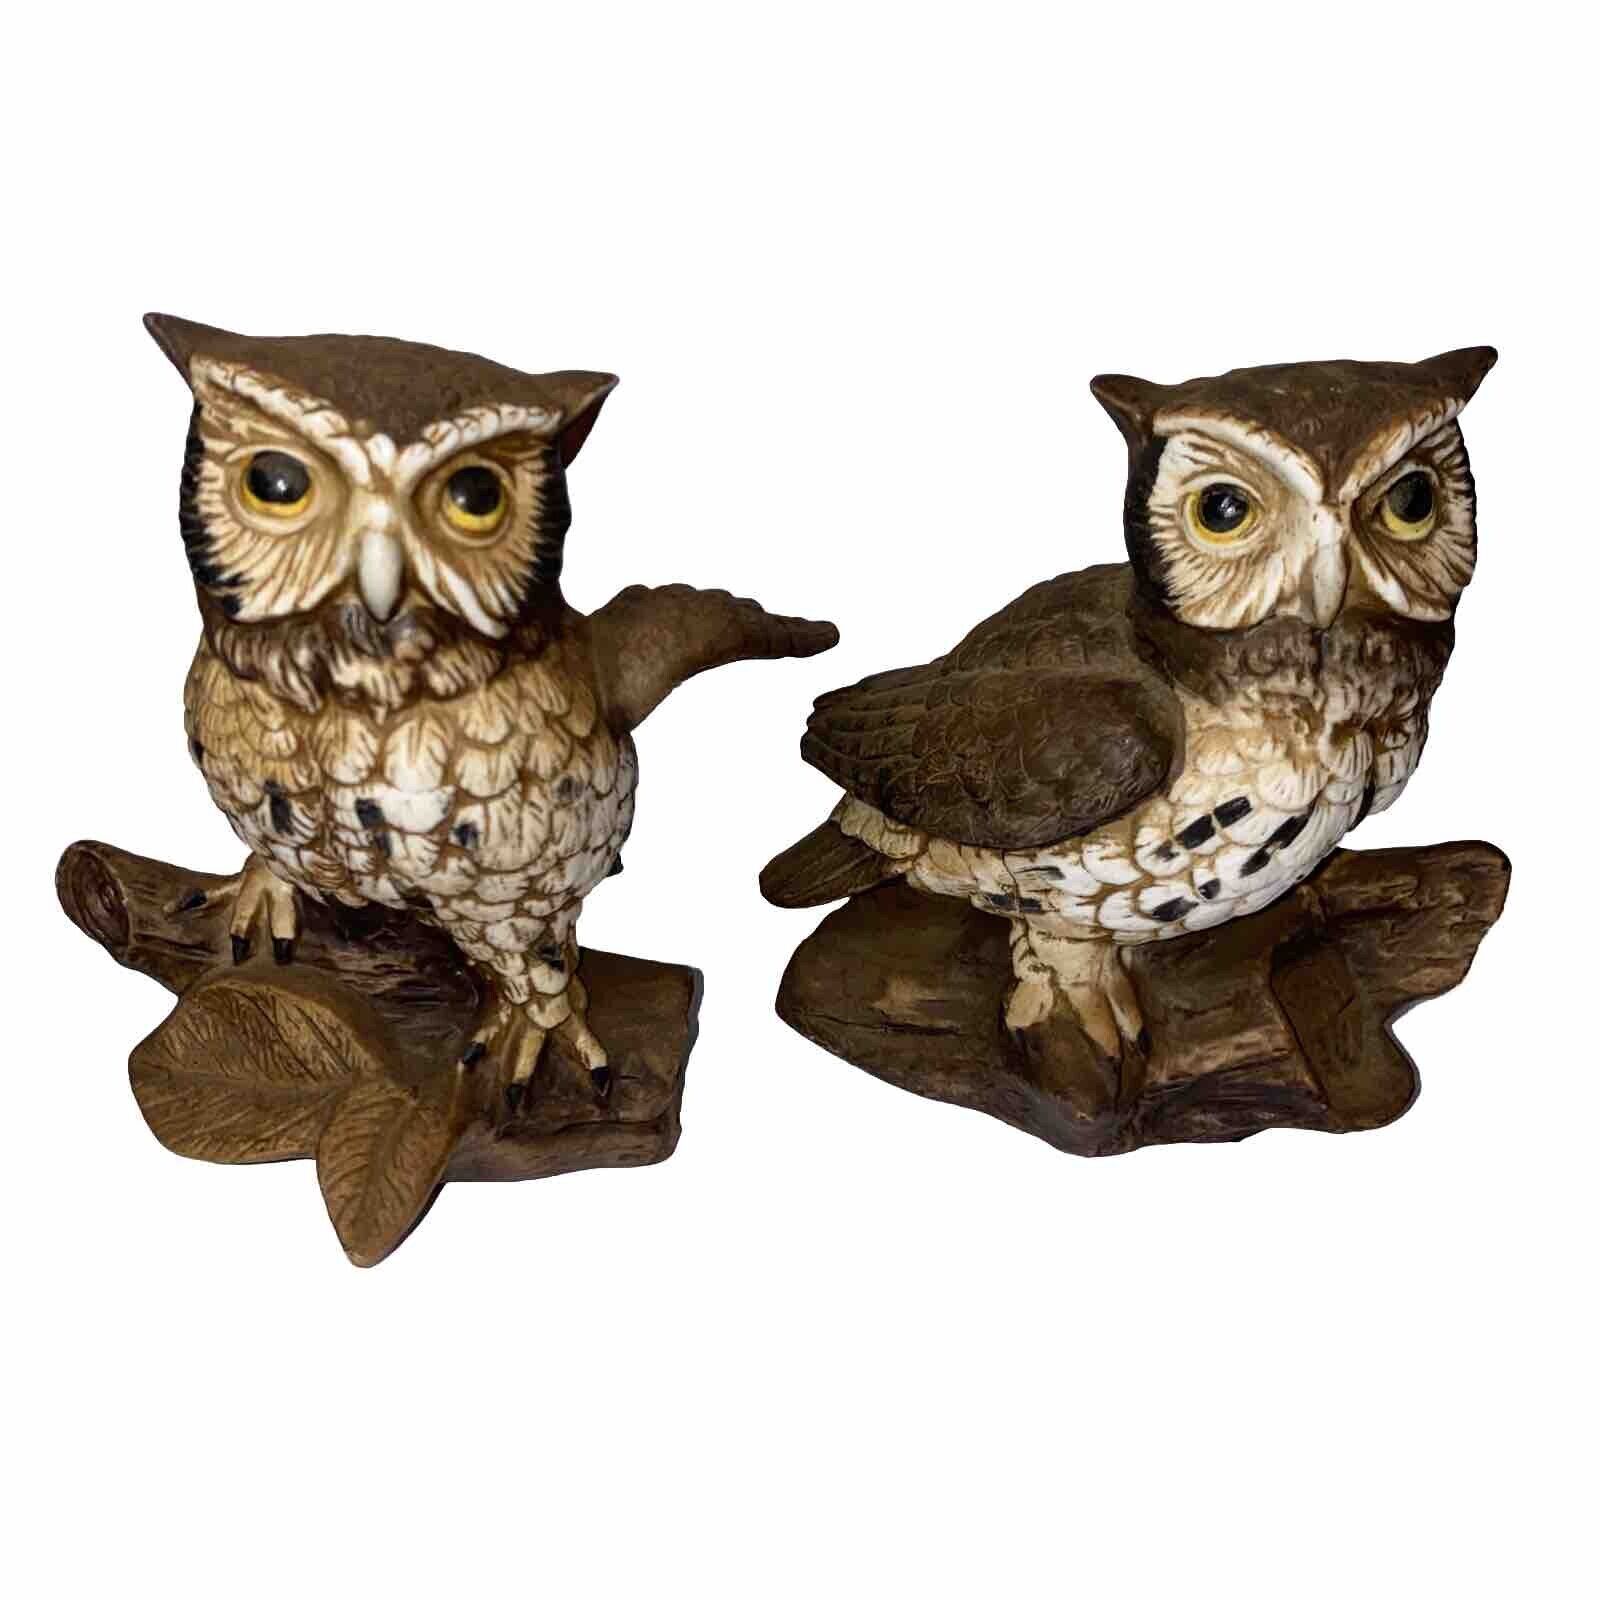 VTG Owls Signed By Artist Numbered 1114 Homco Set Of 2 Granny Core